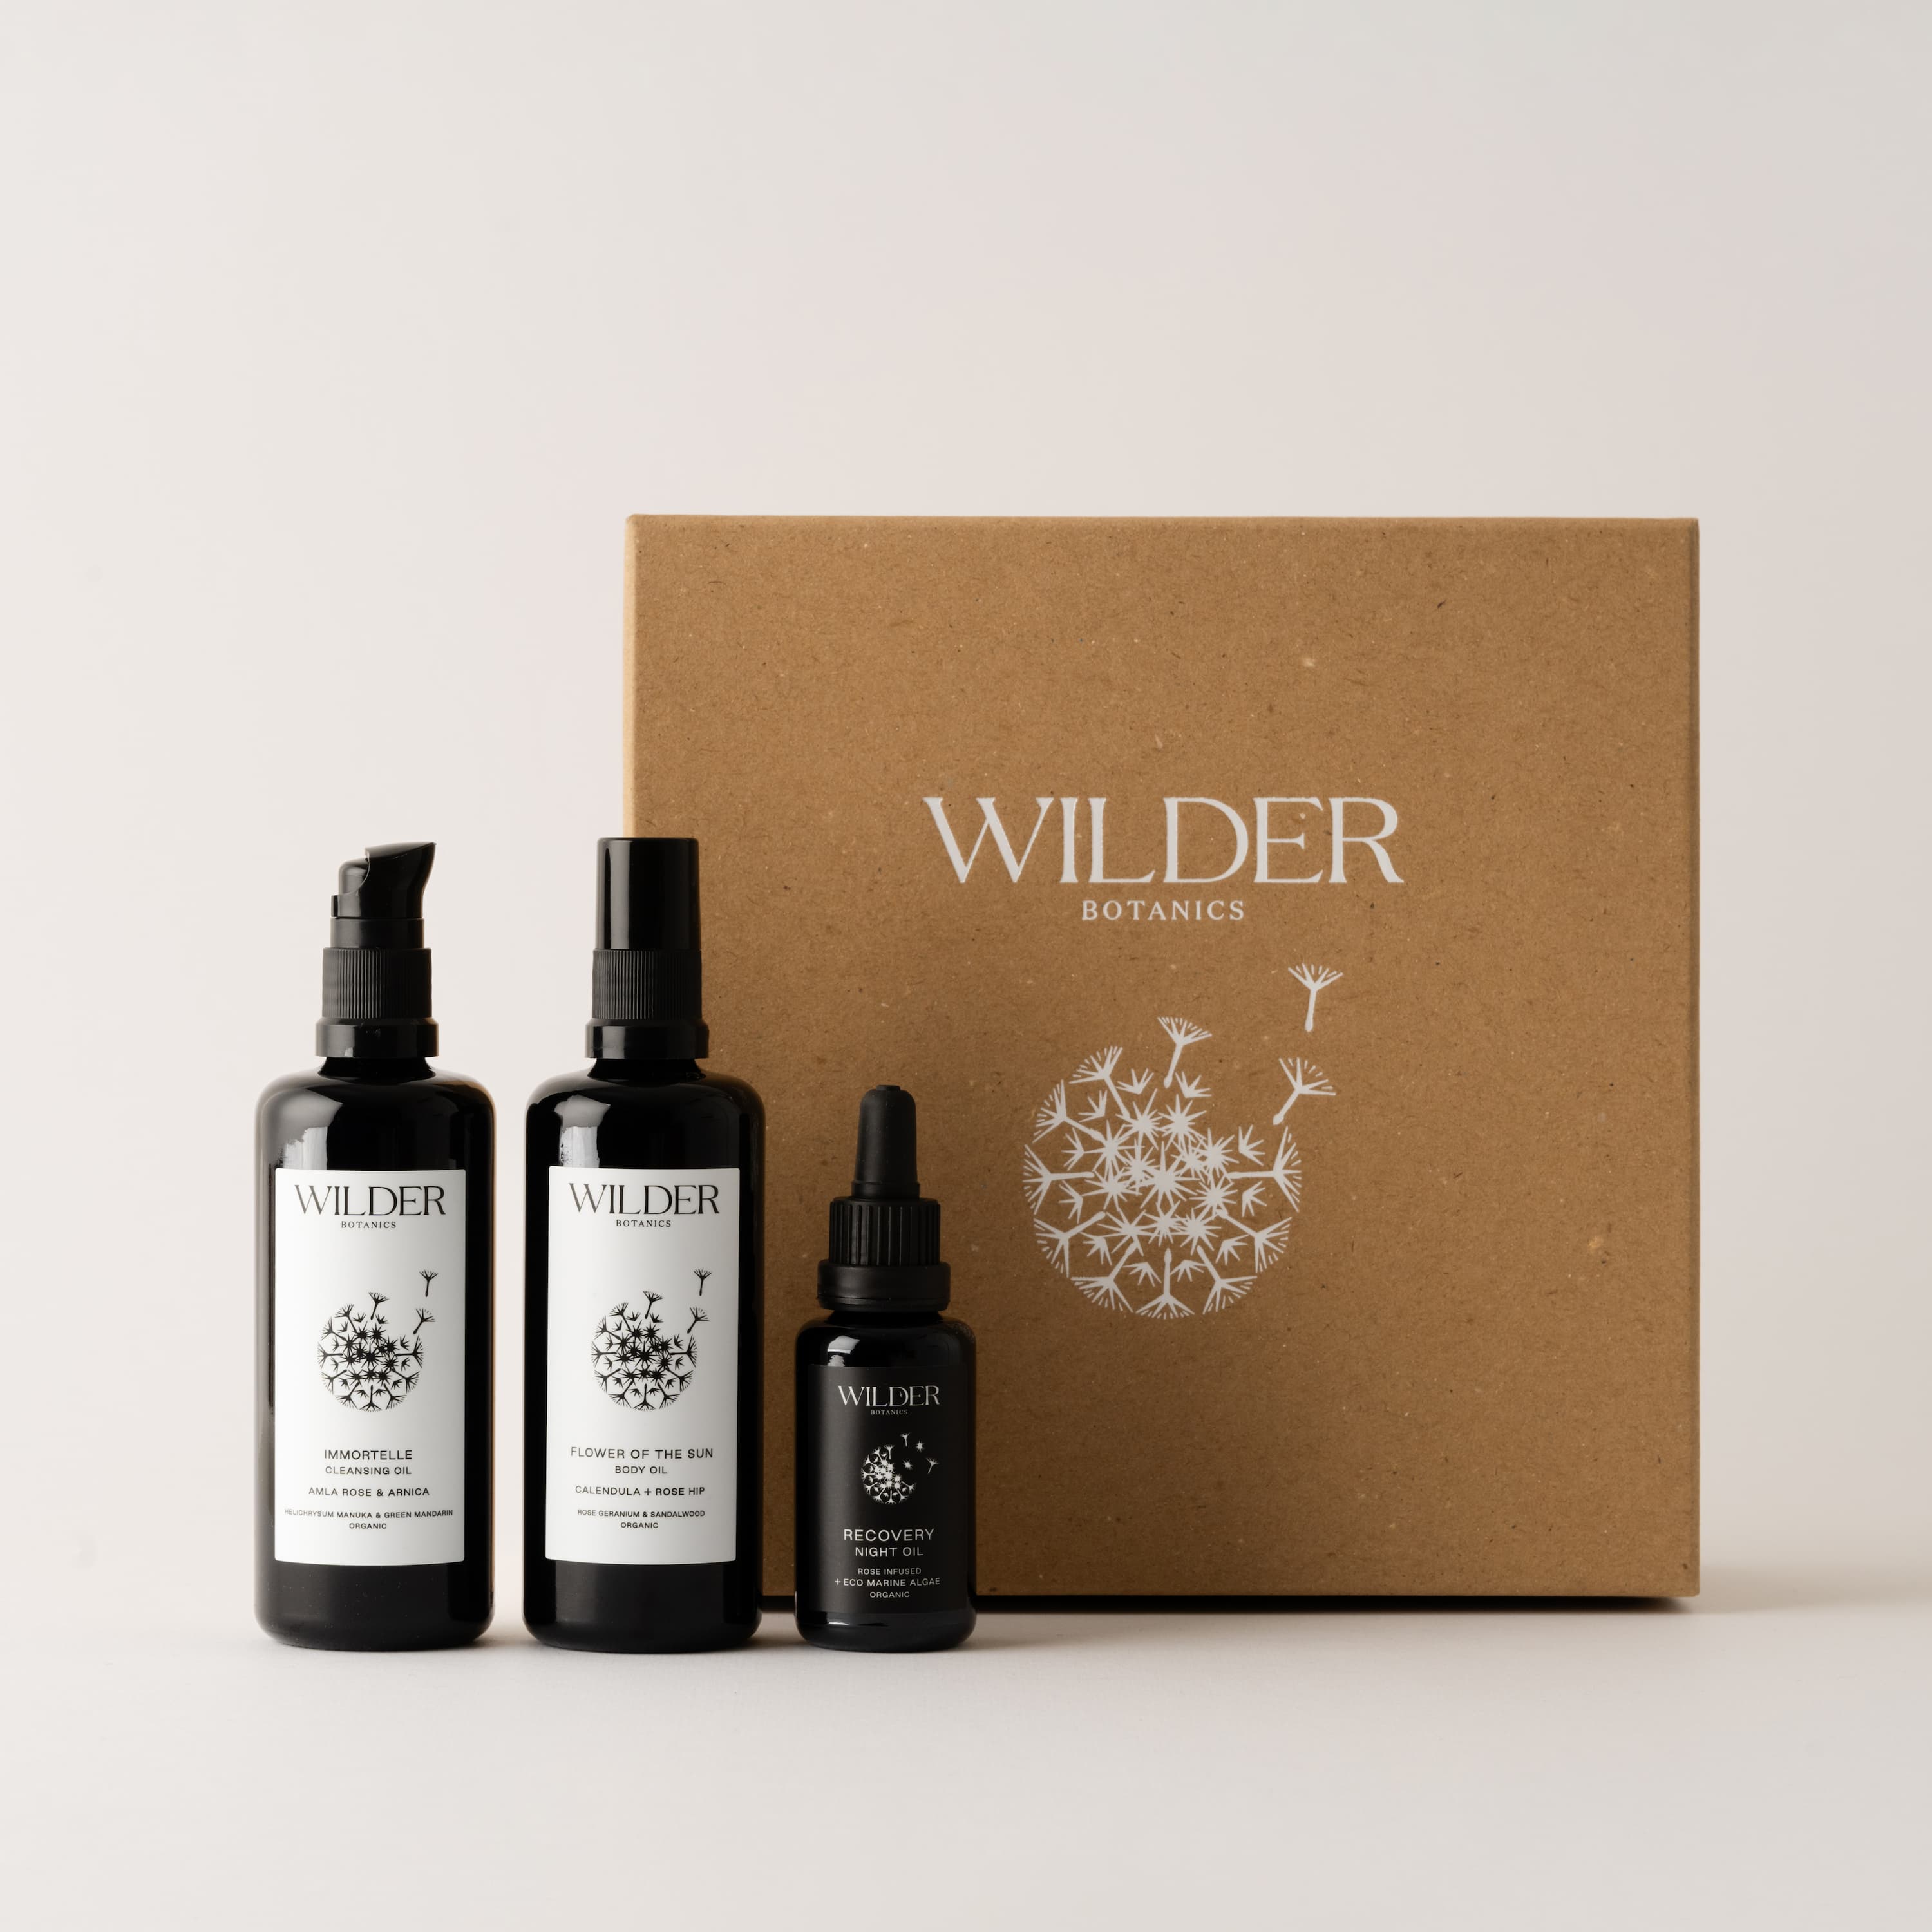 Wilder Beauty Box 4 Immortelle - Recovery - Flower Of the Sun